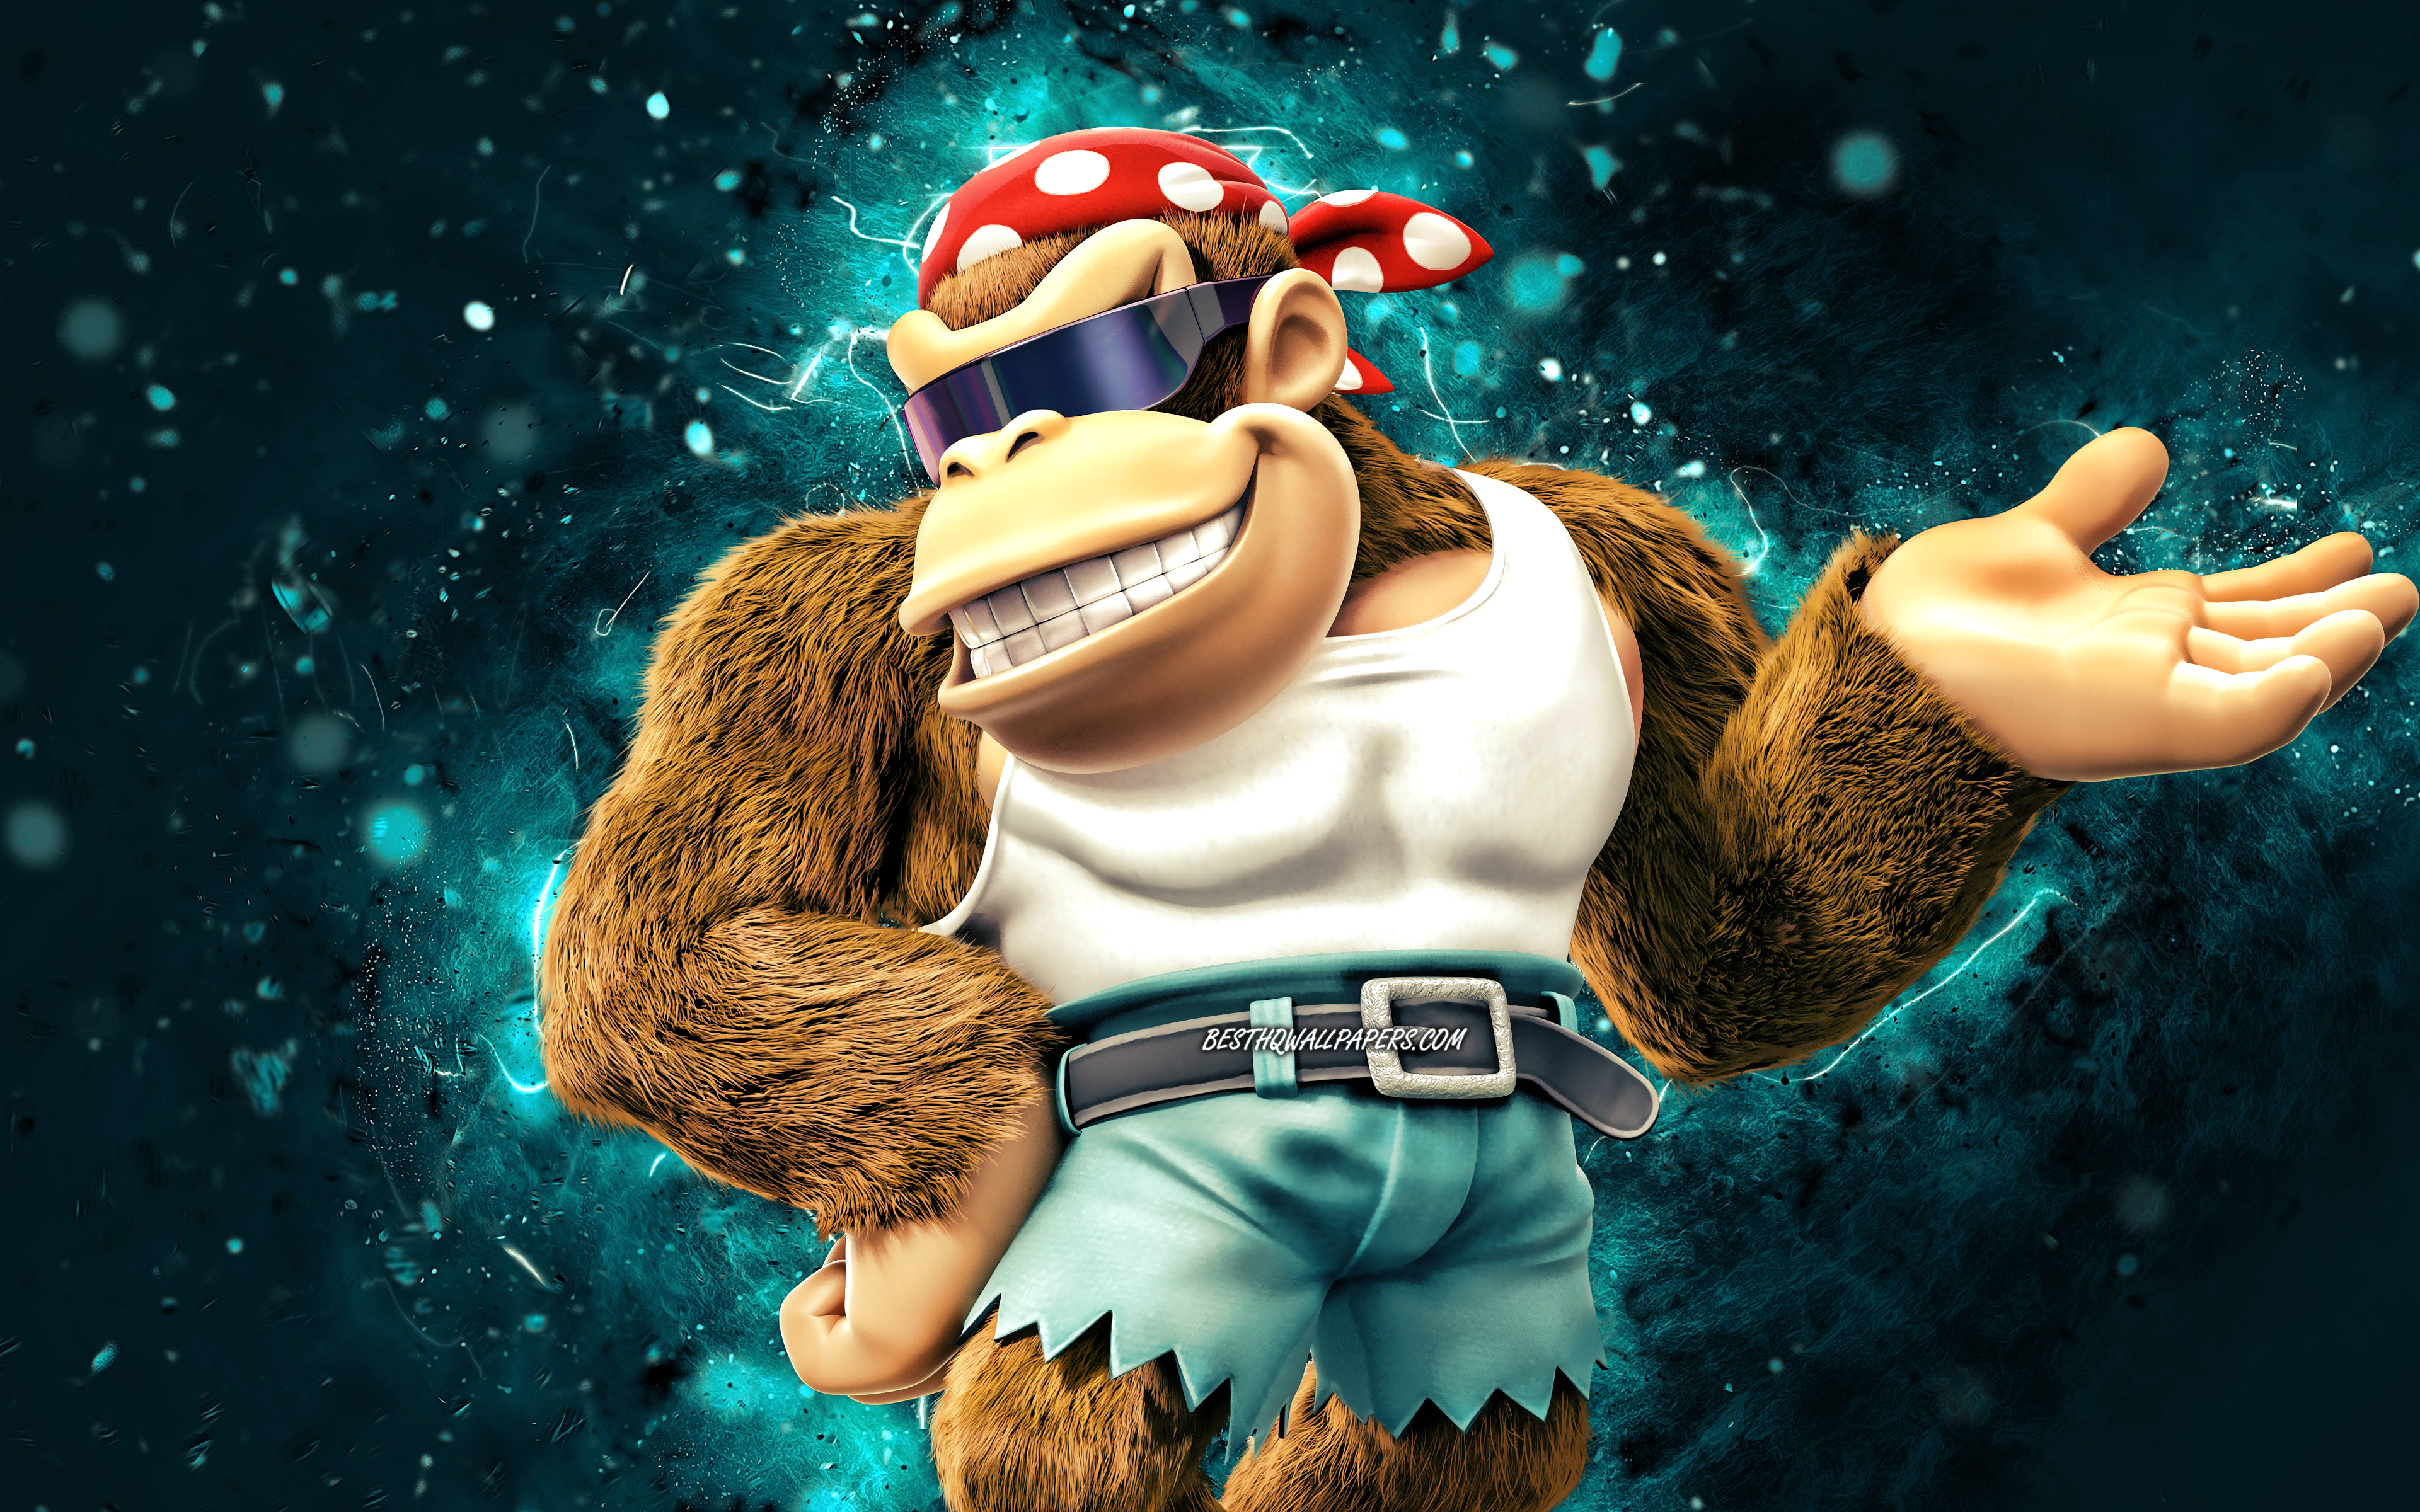 Download wallpaper Funky Kong, 4k, cartoon monkey, blue neon lights, Super Mario, creative, Super Mario characters, Super Mario Bros, Funky Kong Super Mario for desktop with resolution 3840x2400. High Quality HD picture